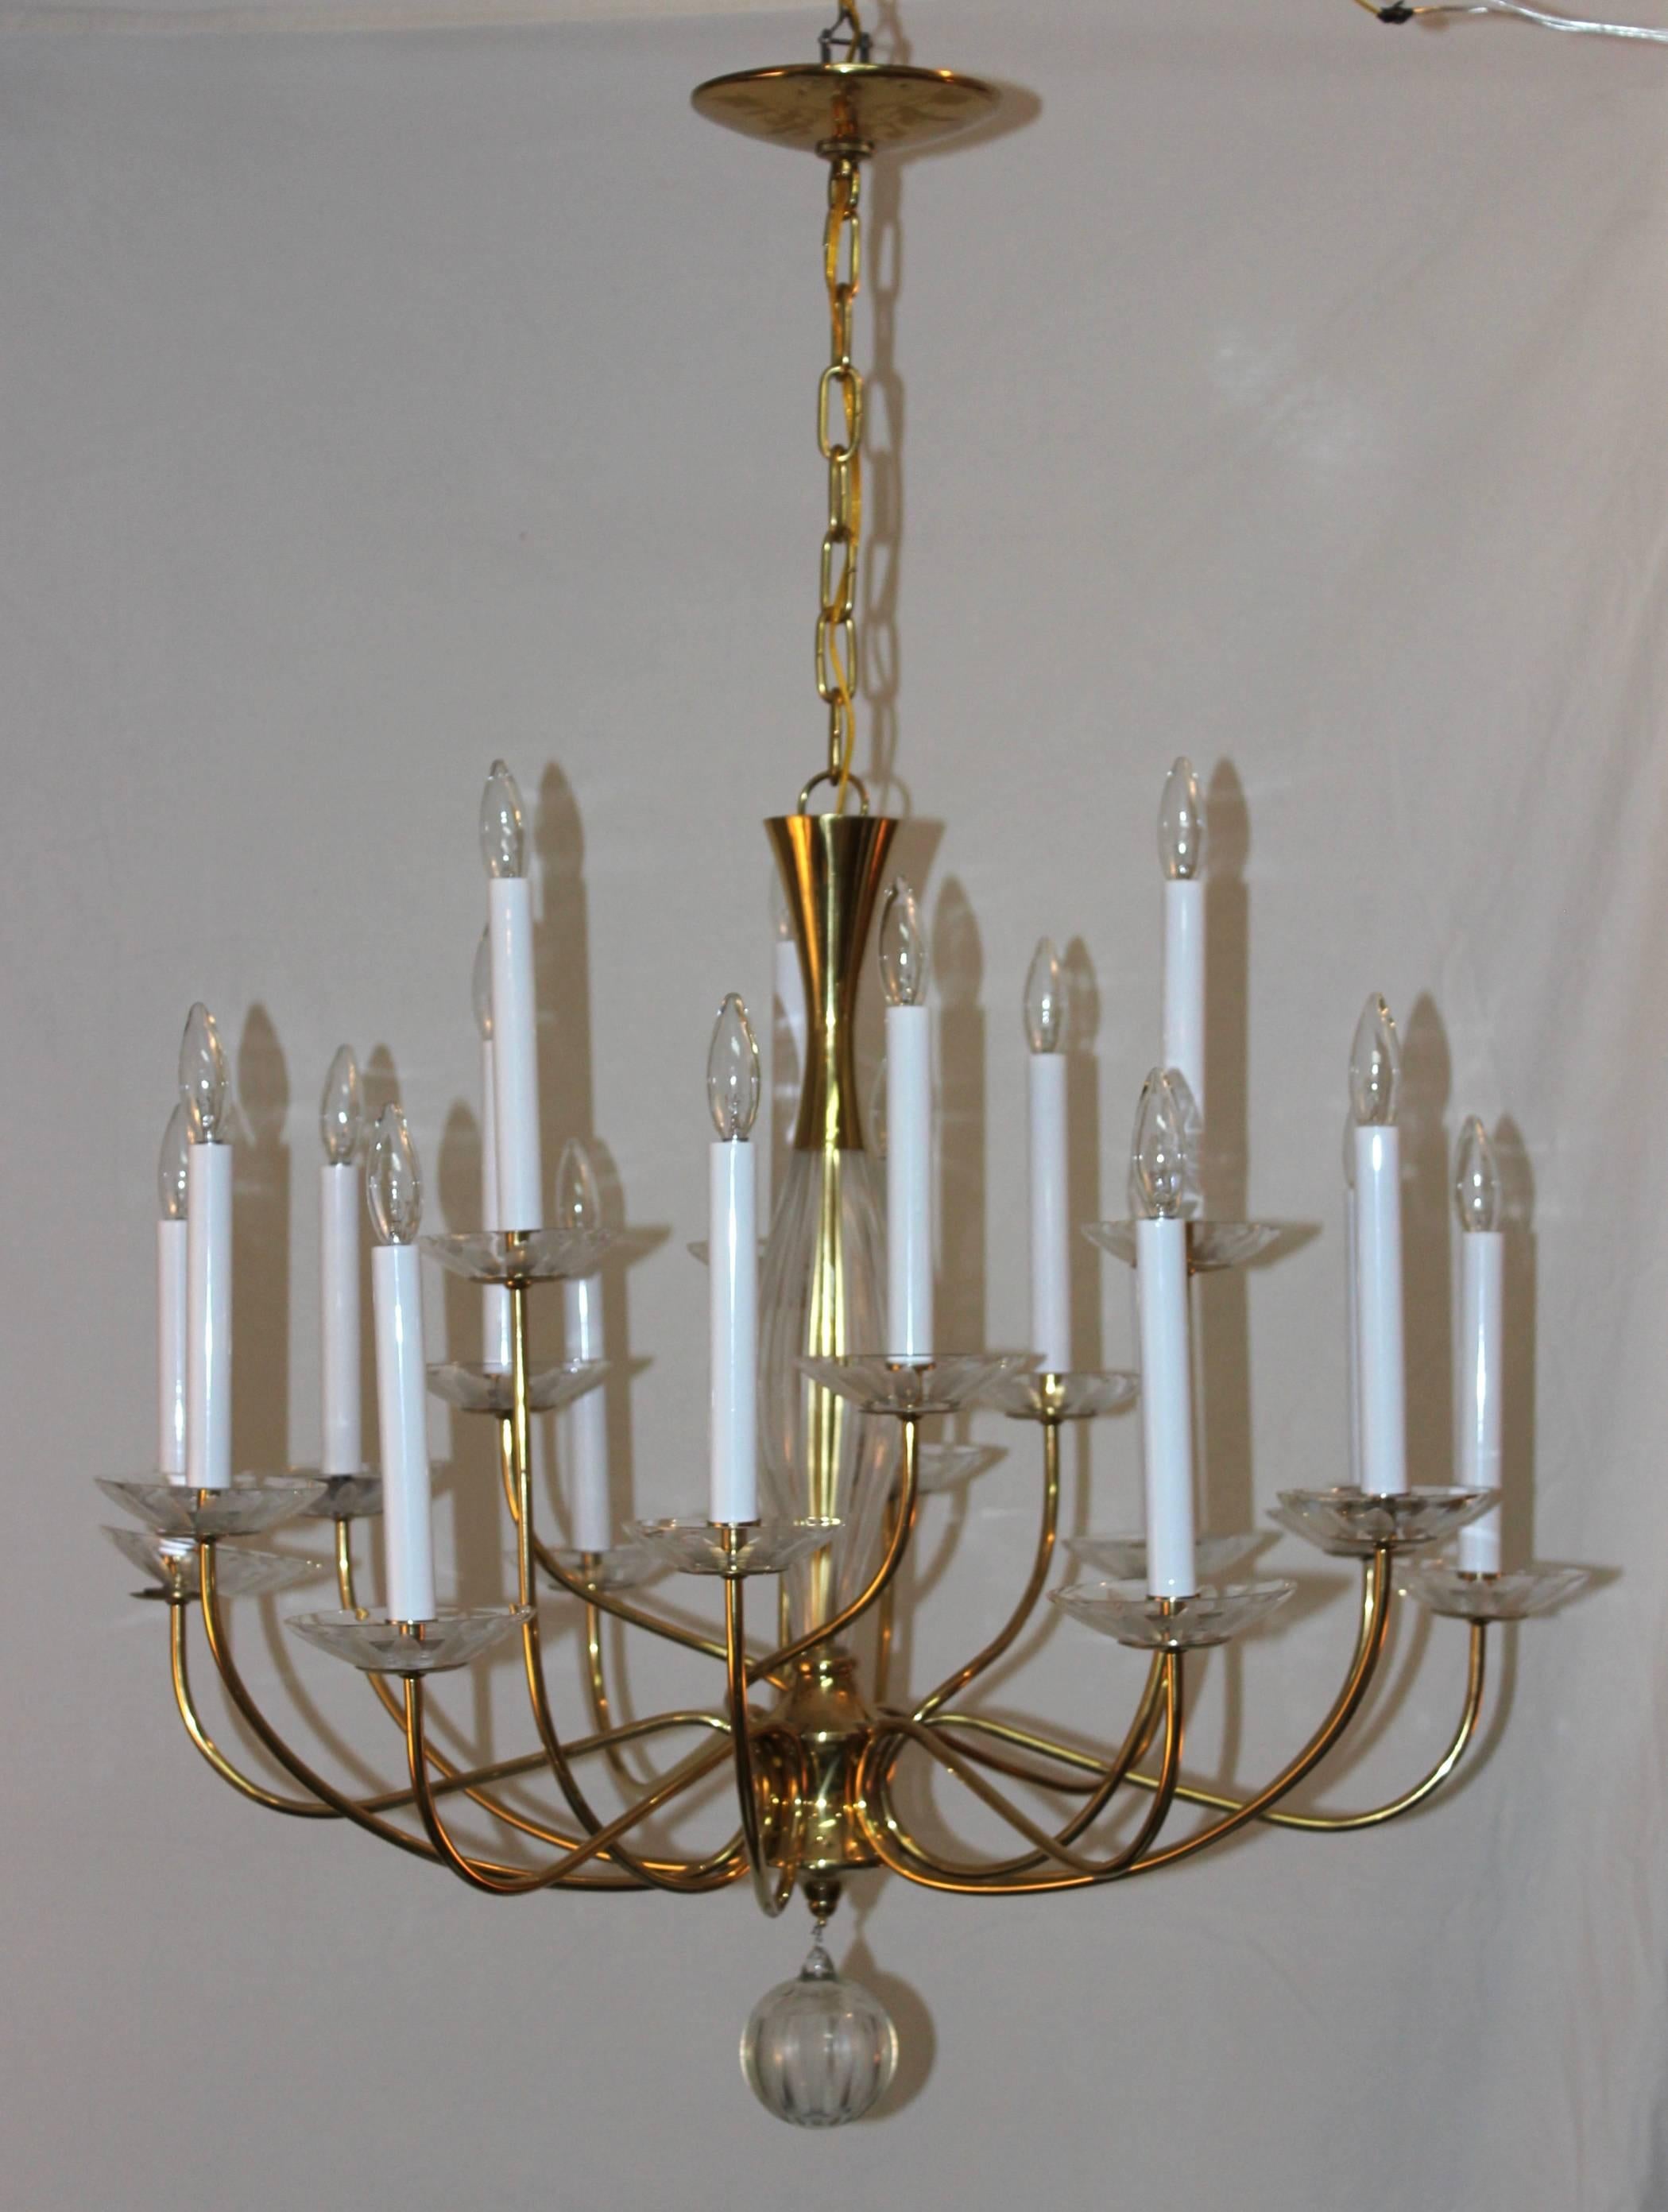 1950s modern large brass and cut glass 18-arm chandelier by Lightolier.

The height can be adjusted. 

